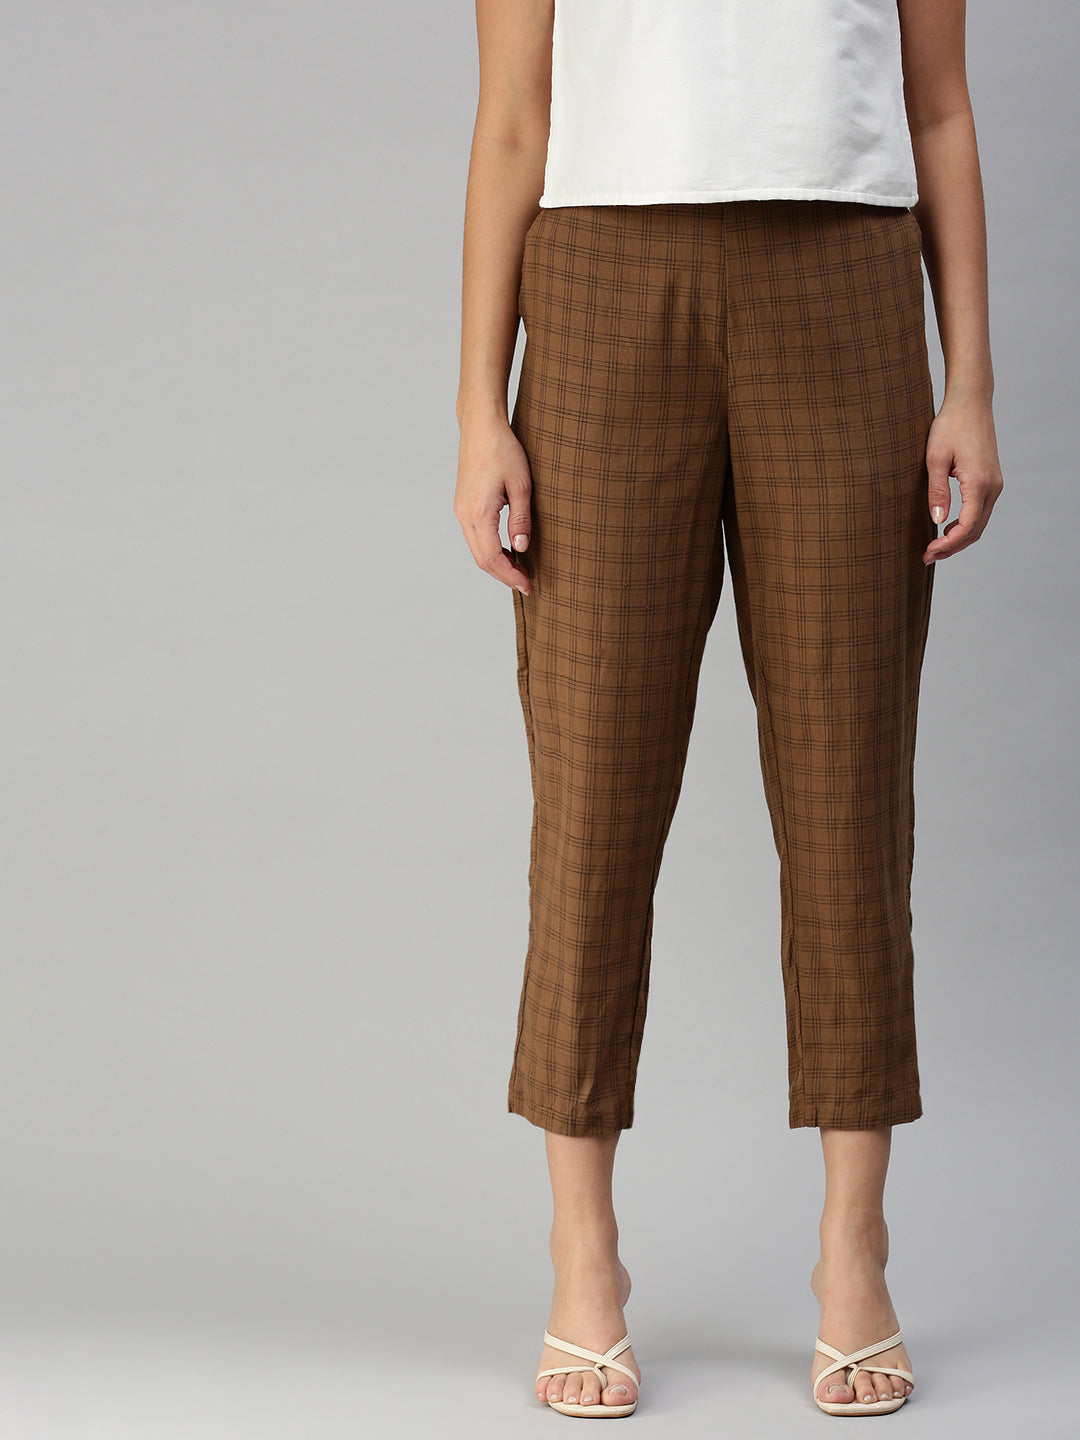 Beatrice. B Beatrice.b Cigarette Trousers Brown - ShopStyle Pants